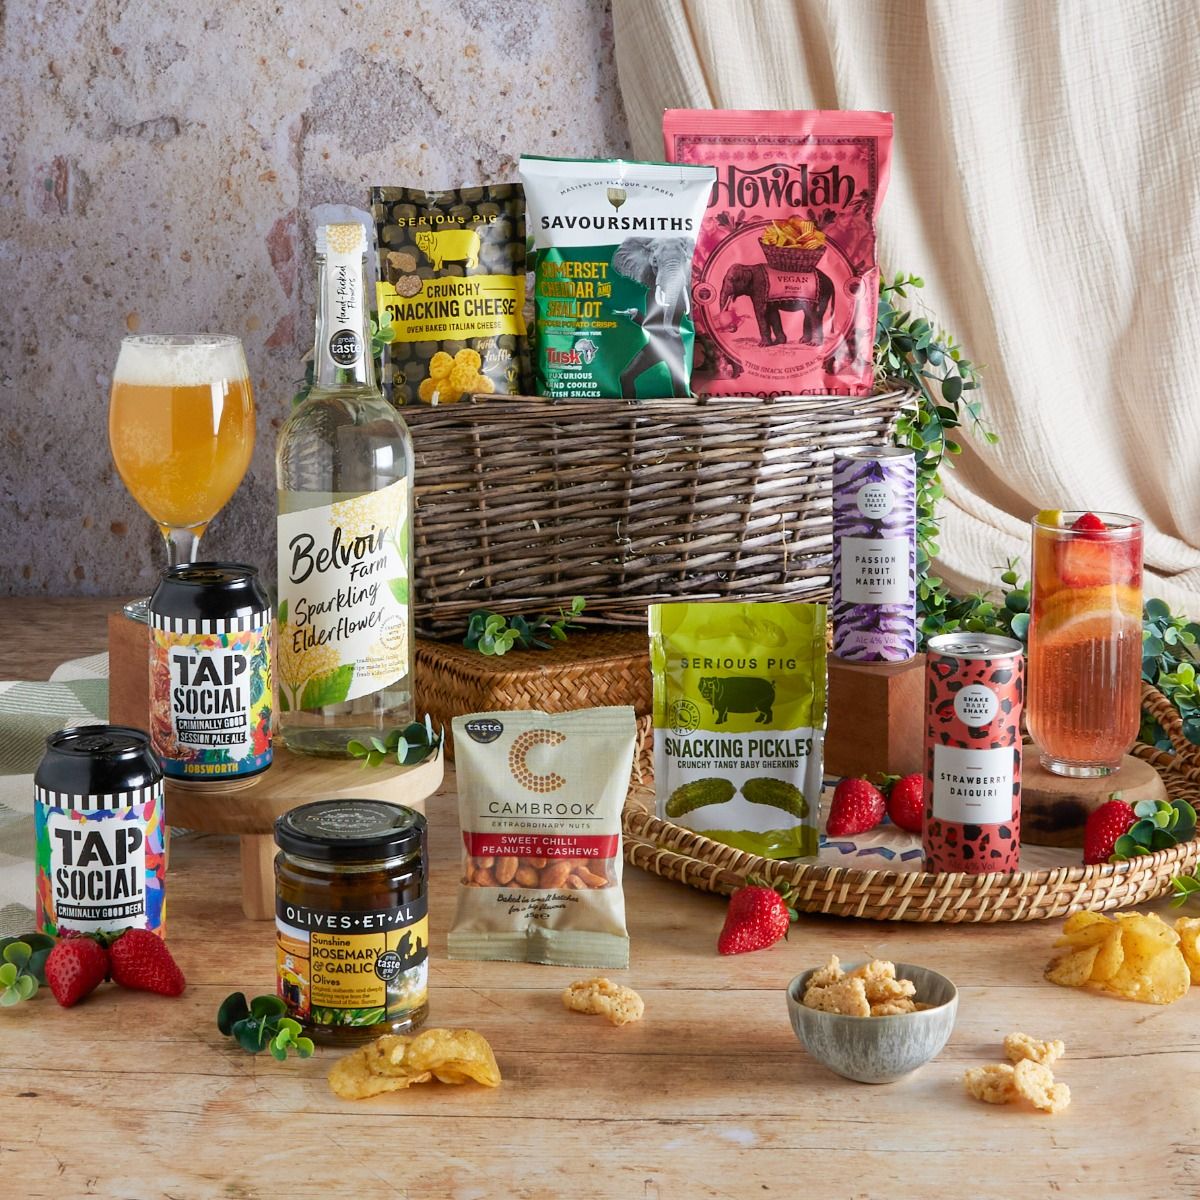 Summertime sharing hamper with contents on display